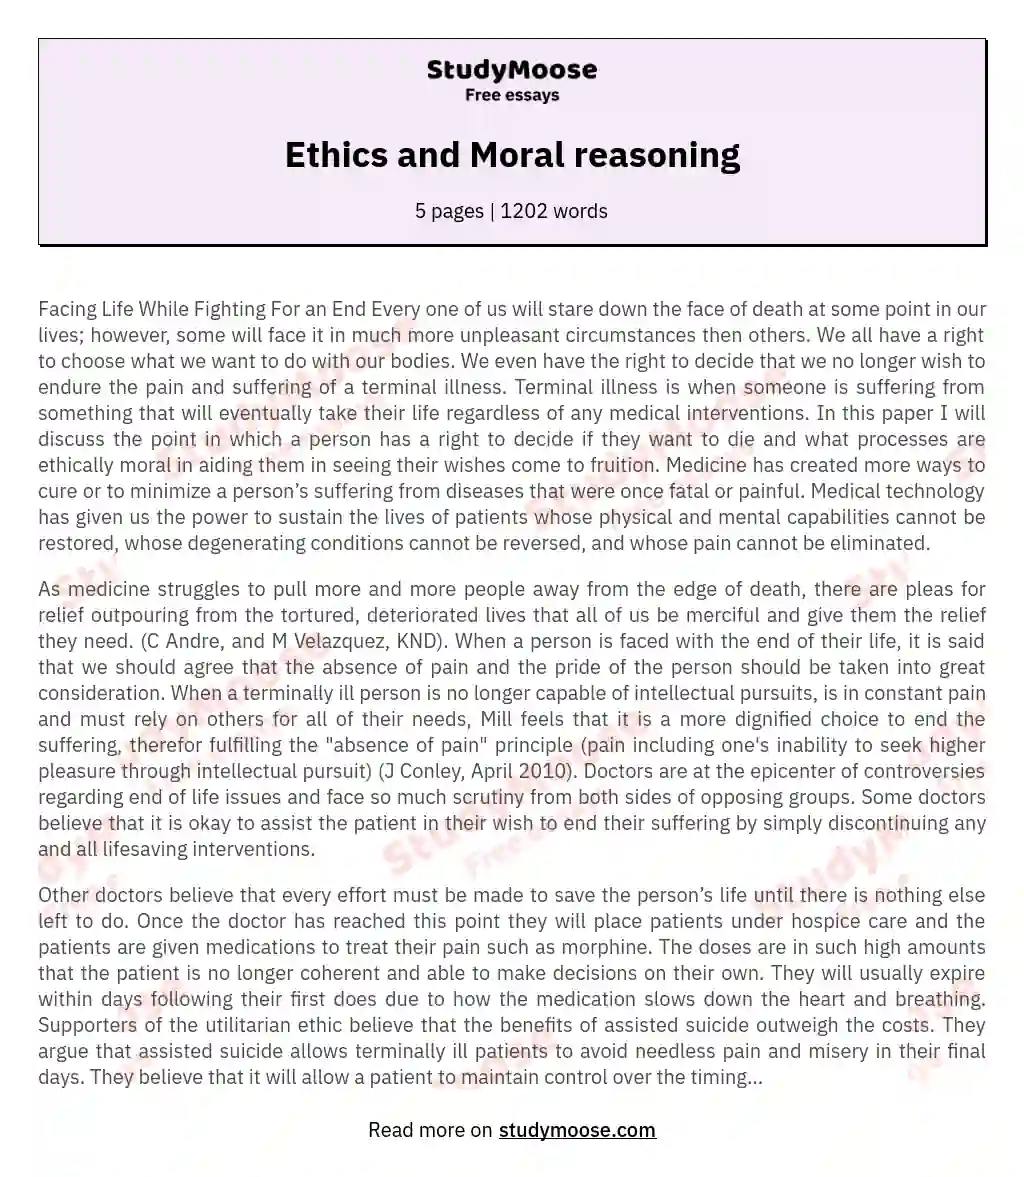 Ethics and Moral reasoning